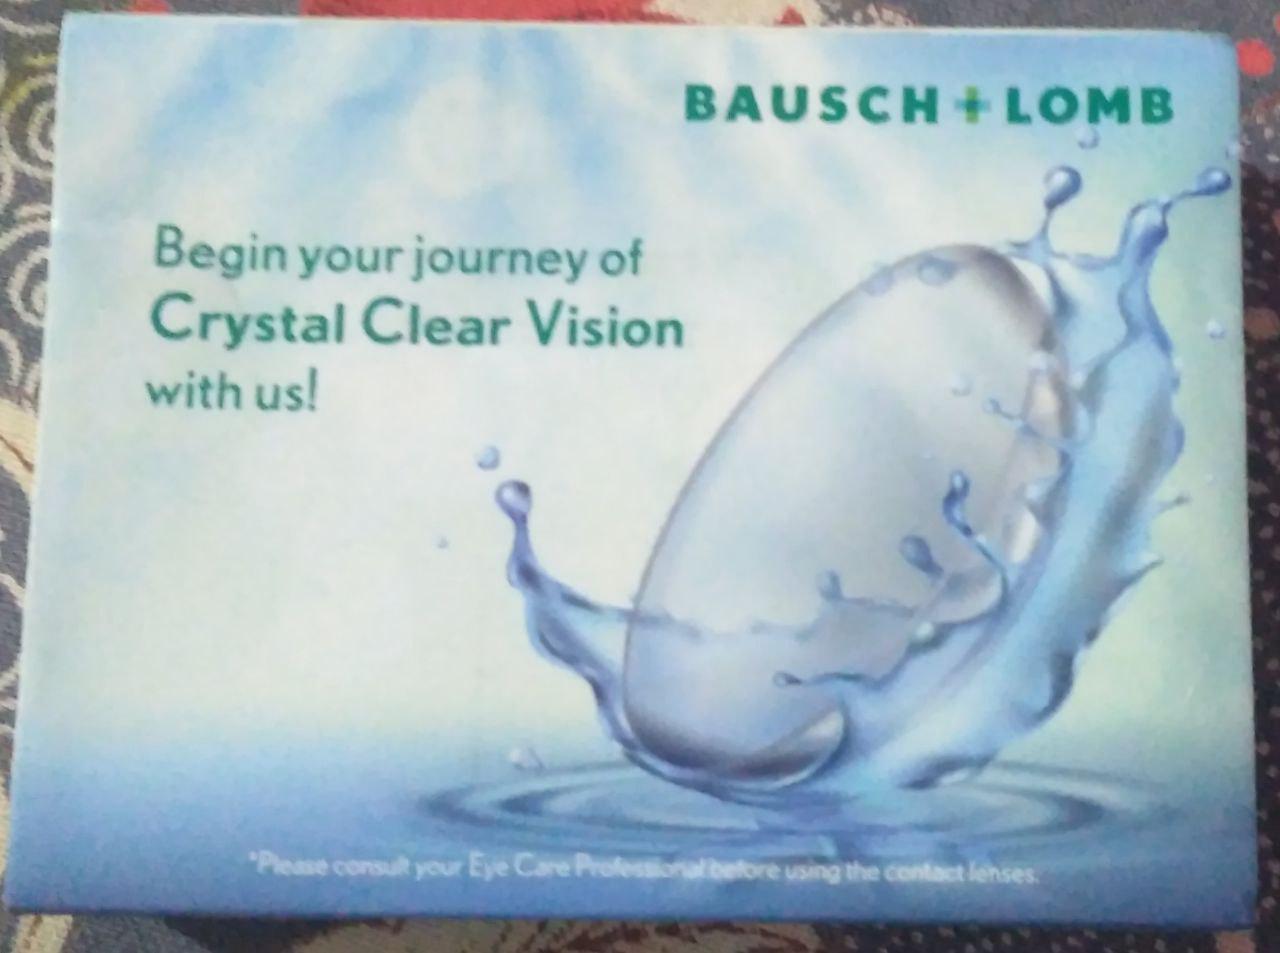 [Freebie] Get Free Contact Lenses From Bausch And Lomb